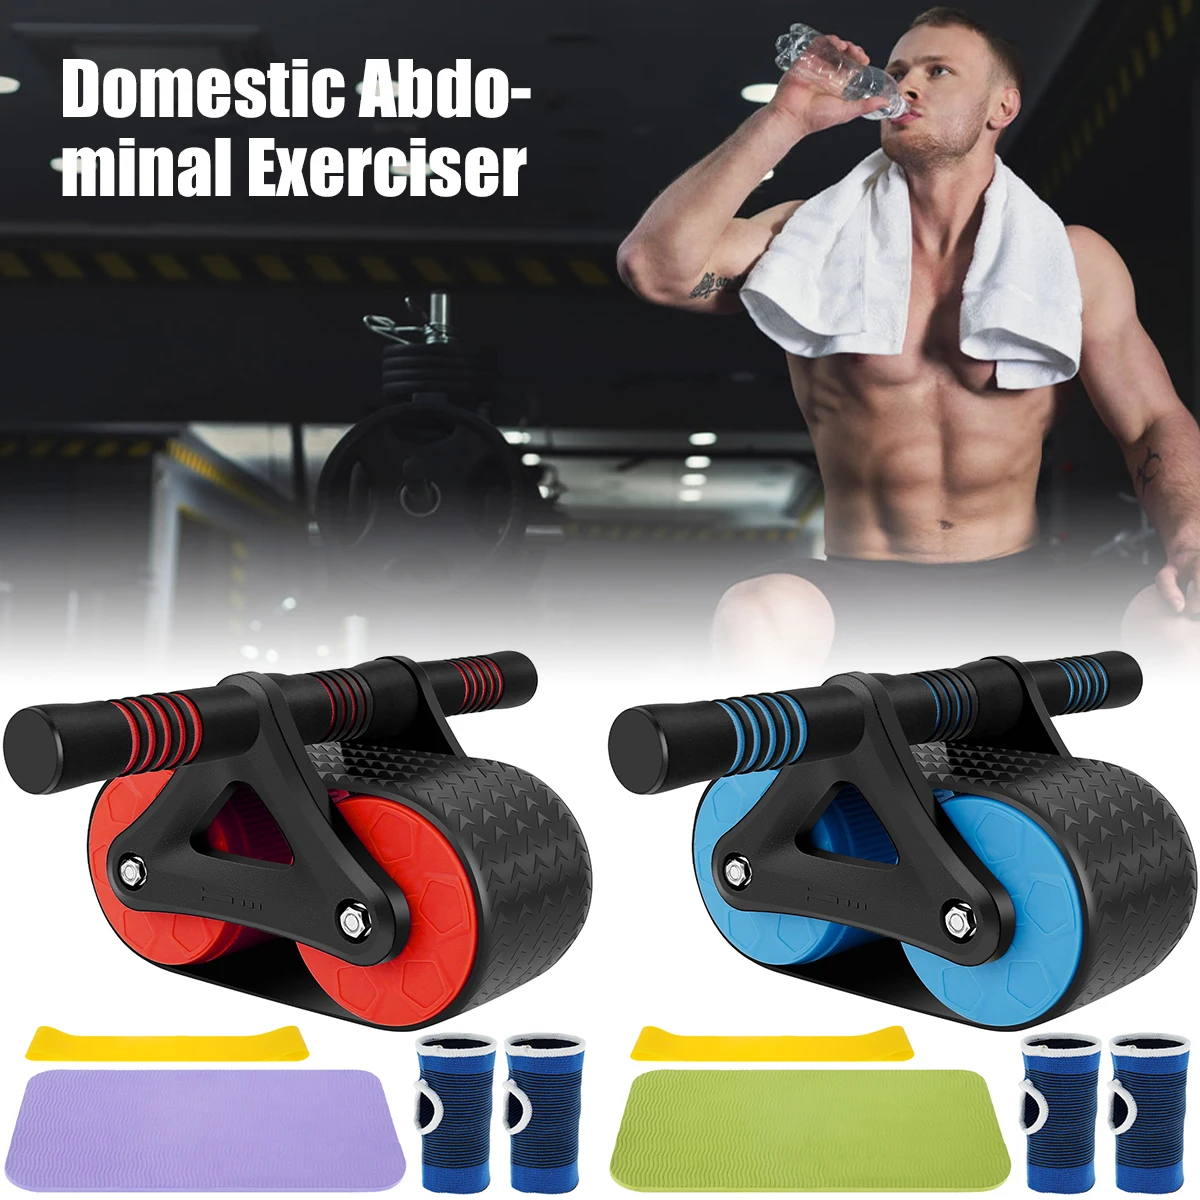 

Abdominal Roller Wheel Set with Mat Gloves and Stretch Band Automatic Rebound Aabdominal Wheel Portable Professional Abdominal